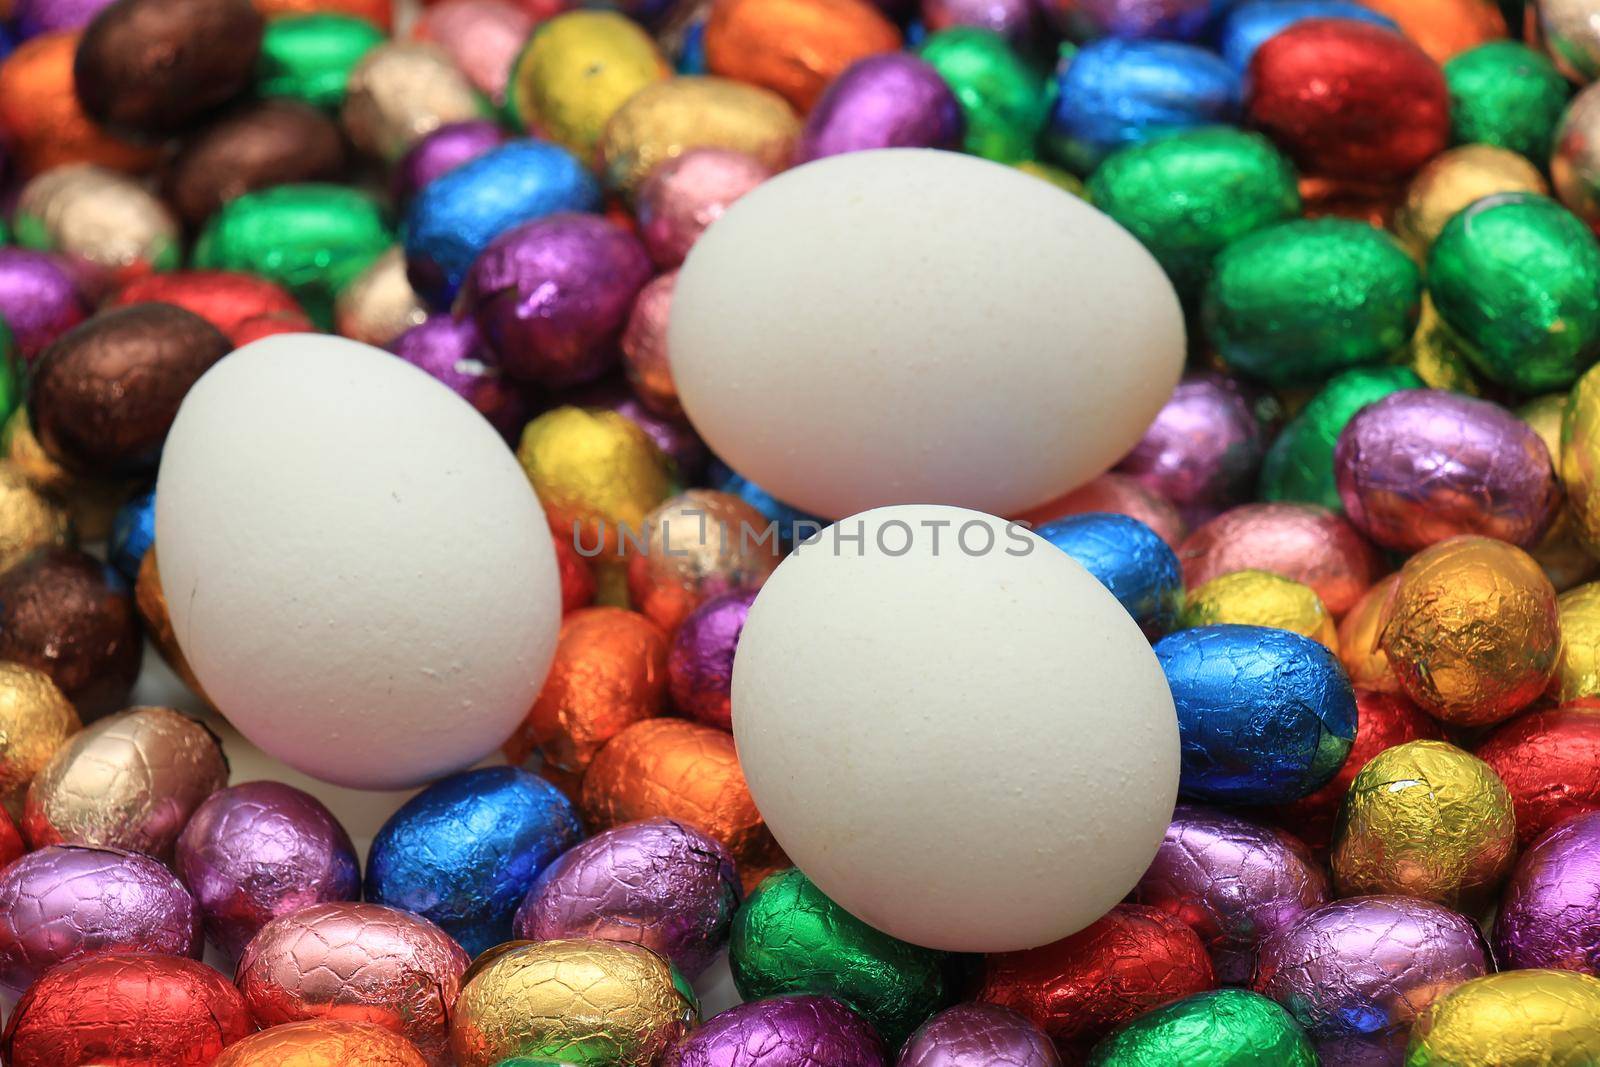 Hen eggs on a pile of colorful wrapped chocolate easter eggs